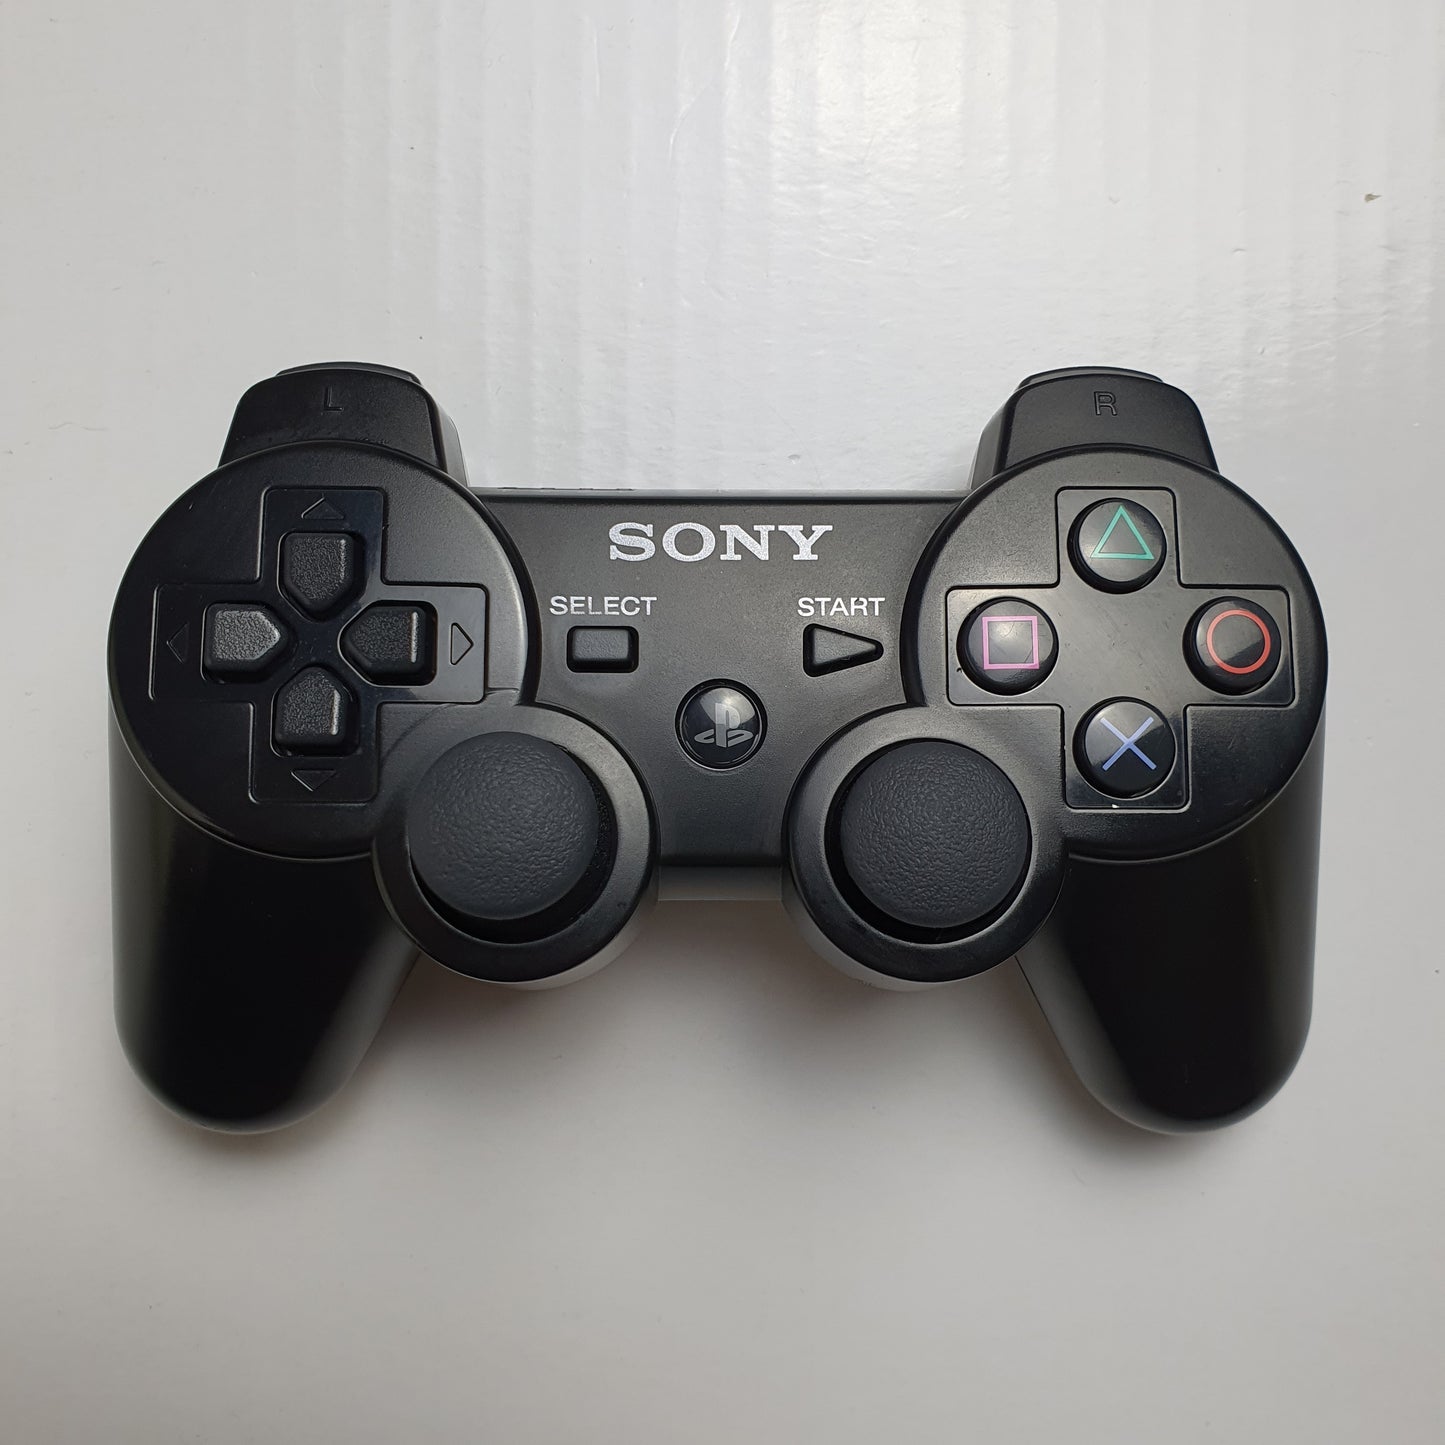 Official Sony PlayStation PS3 DualShock 3 Wireless Black Controller